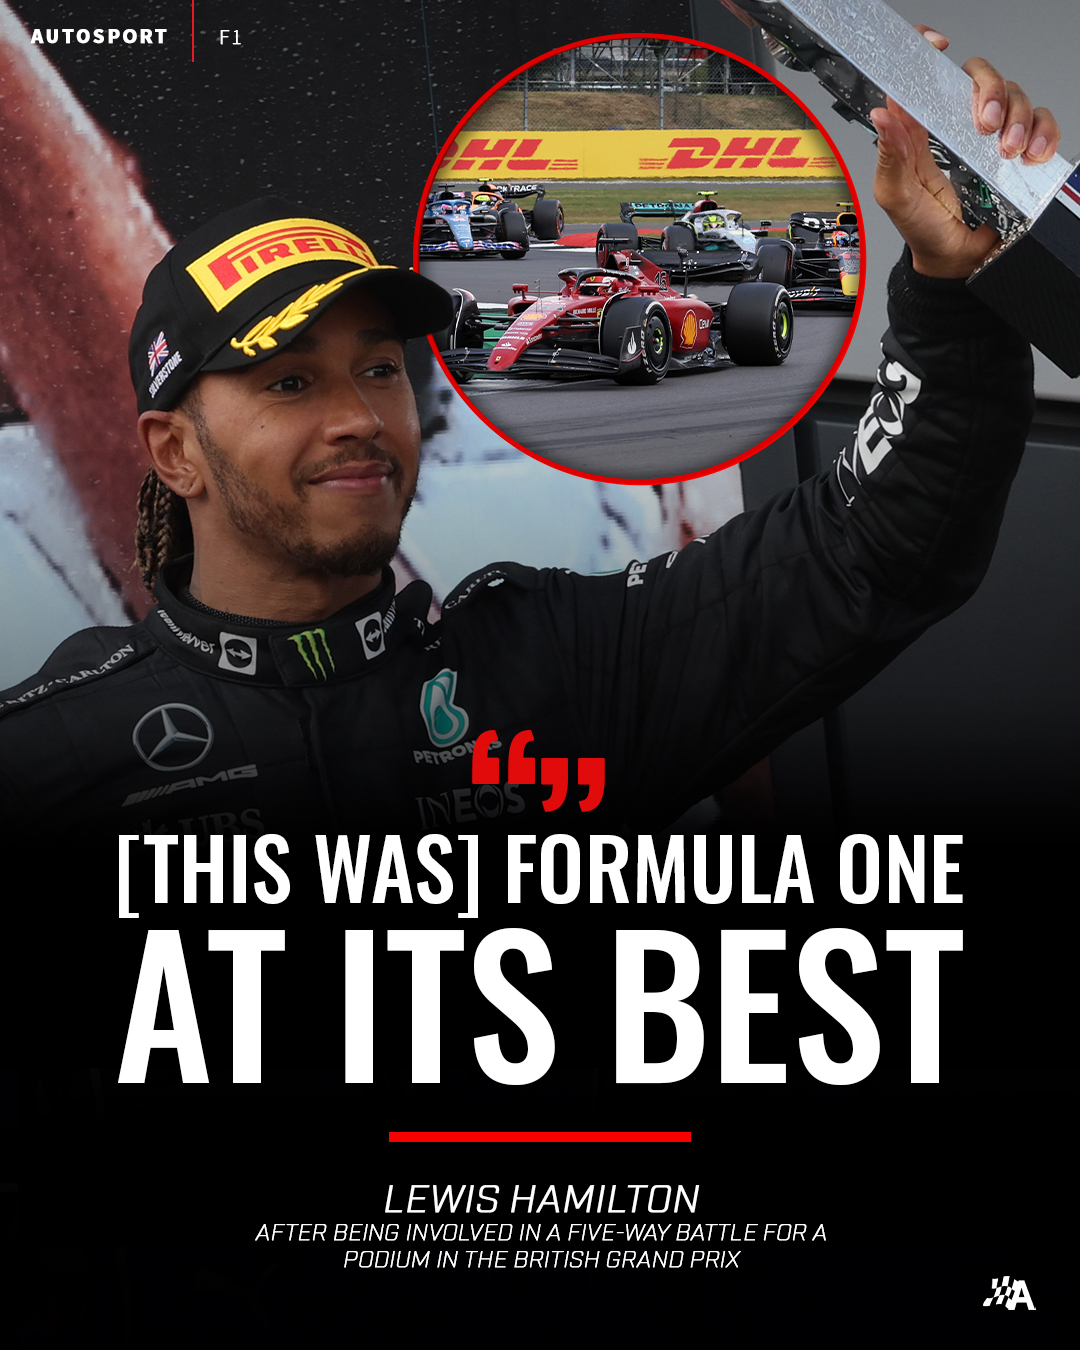 Autosport memes. Best Collection of funny Autosport pictures on